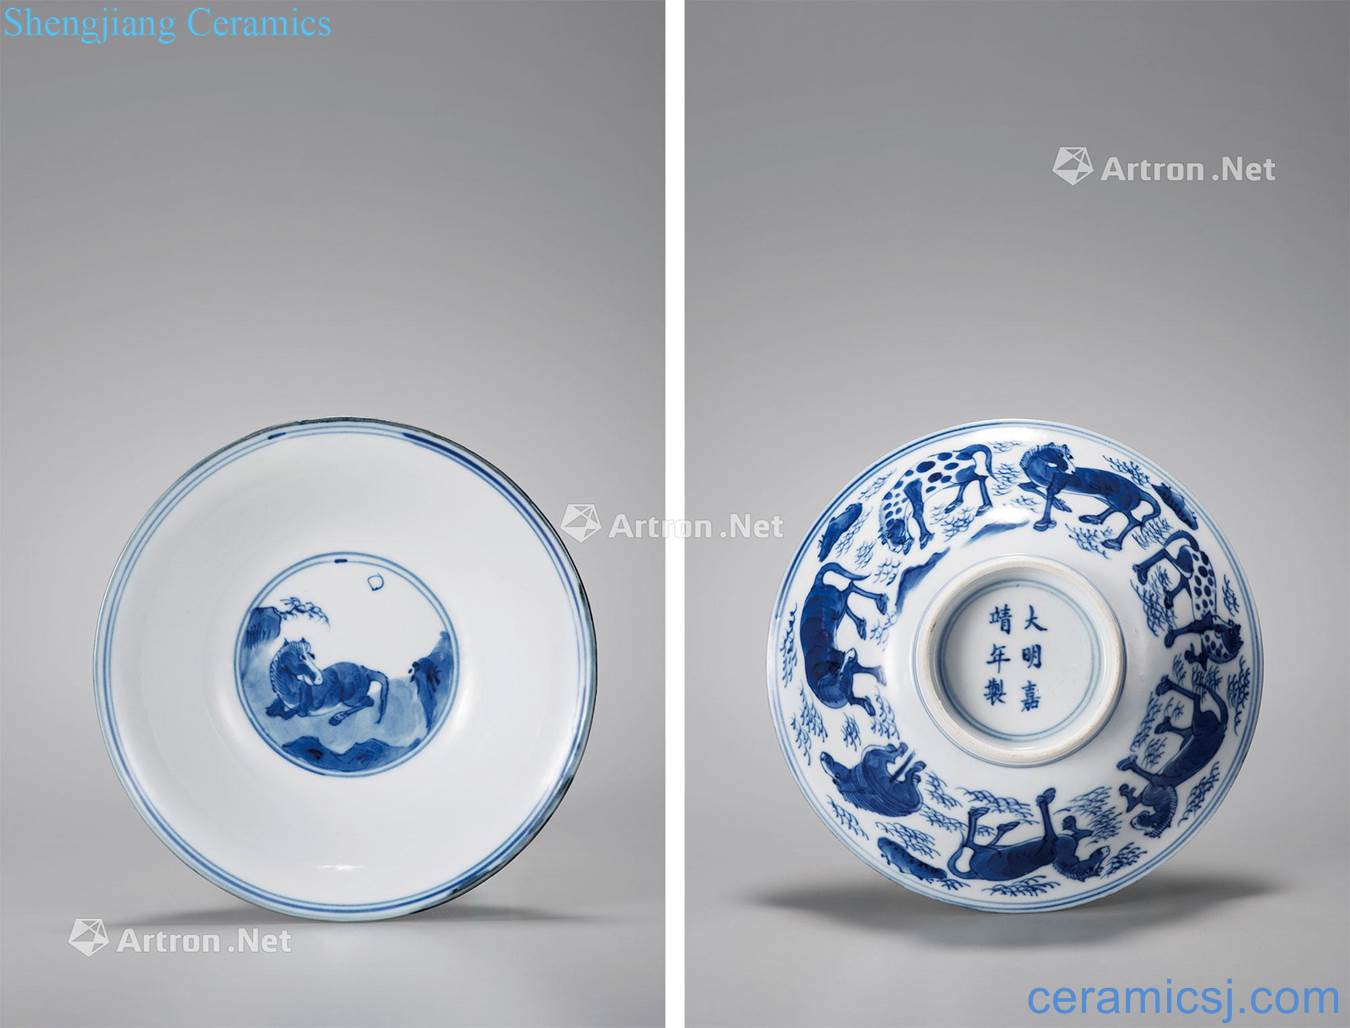 The qing emperor kangxi Eight jun figure hat to bowl of blue and white